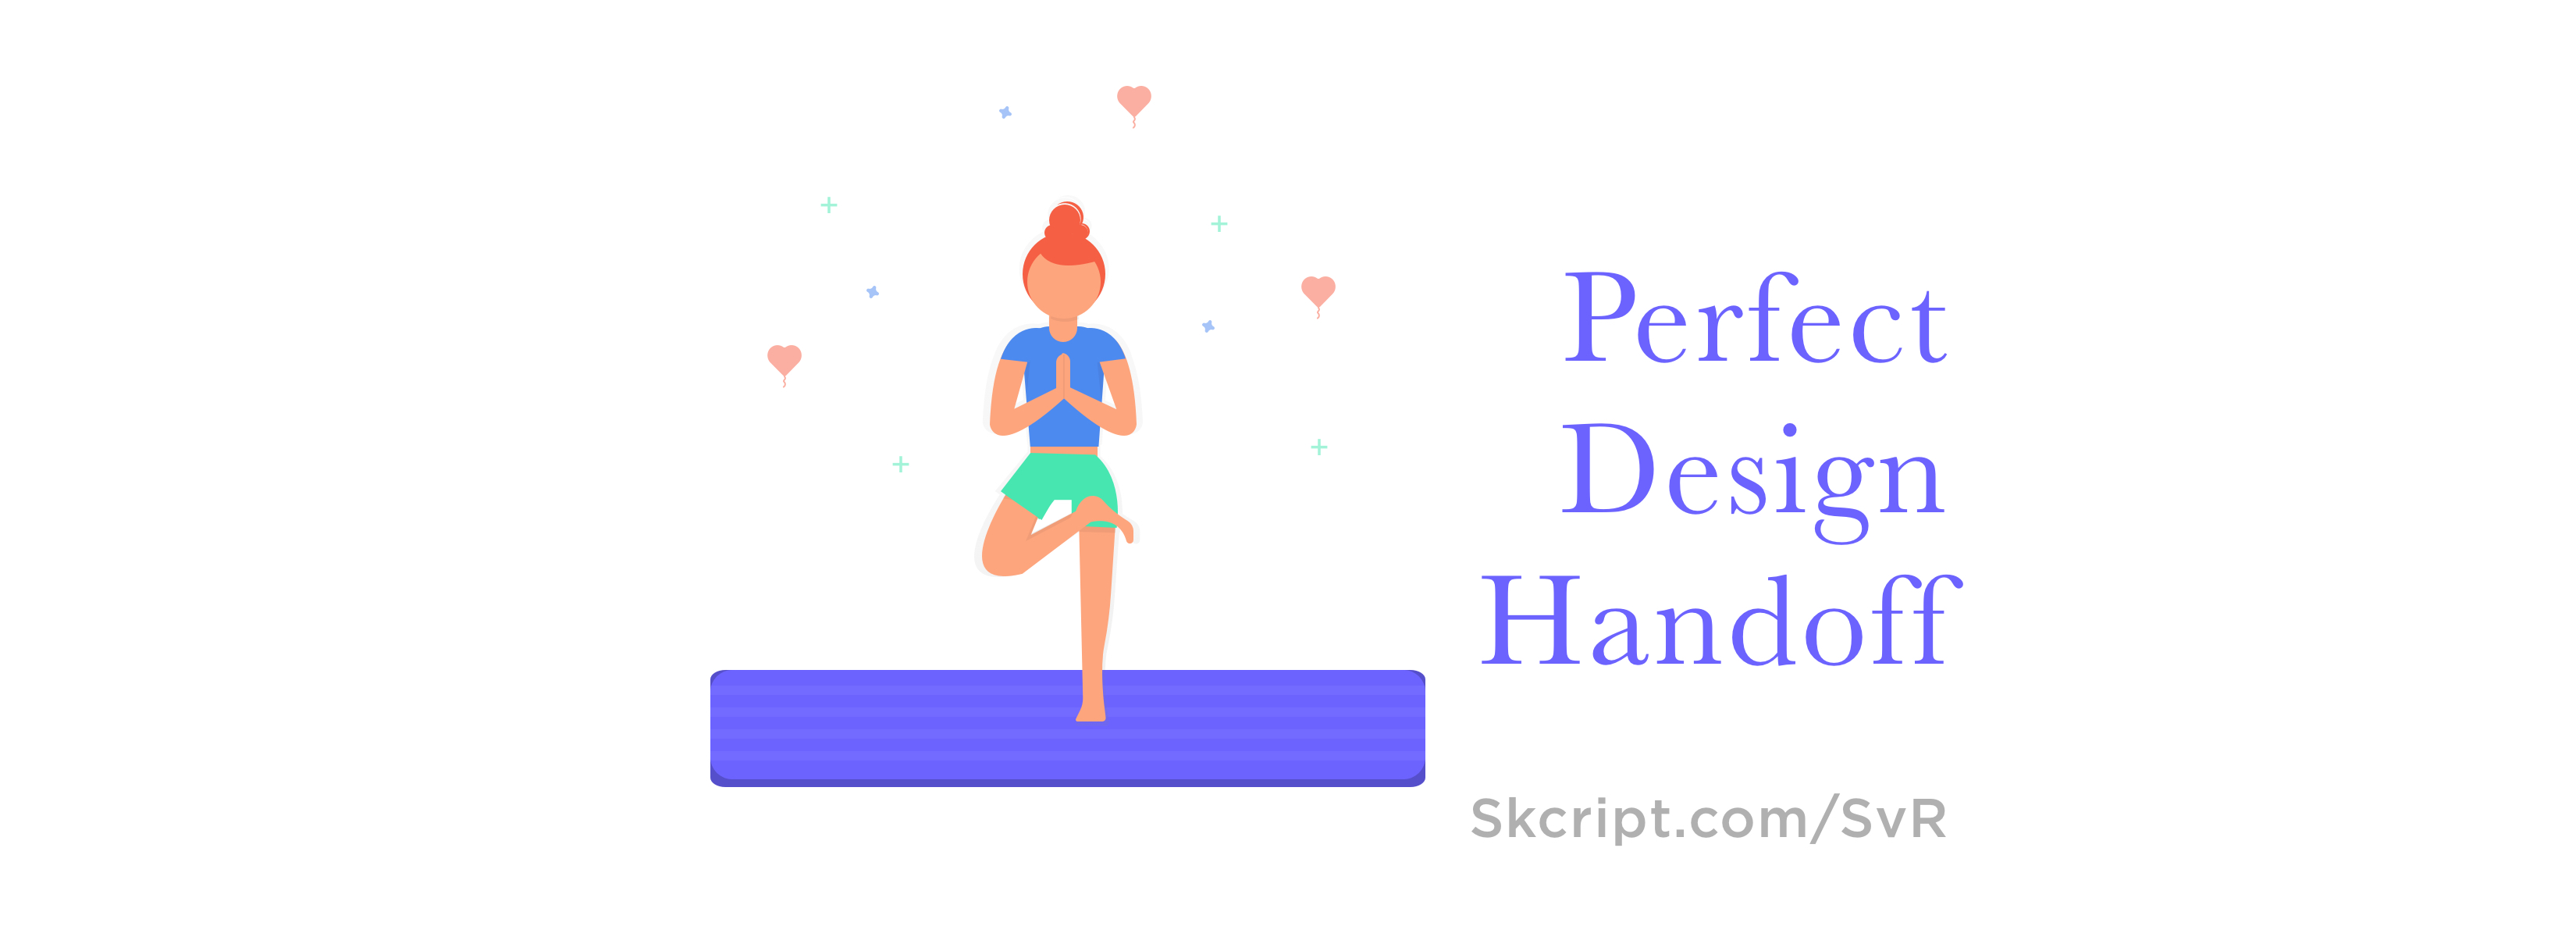 The perfect Design Handoff workflow for Small Businesses